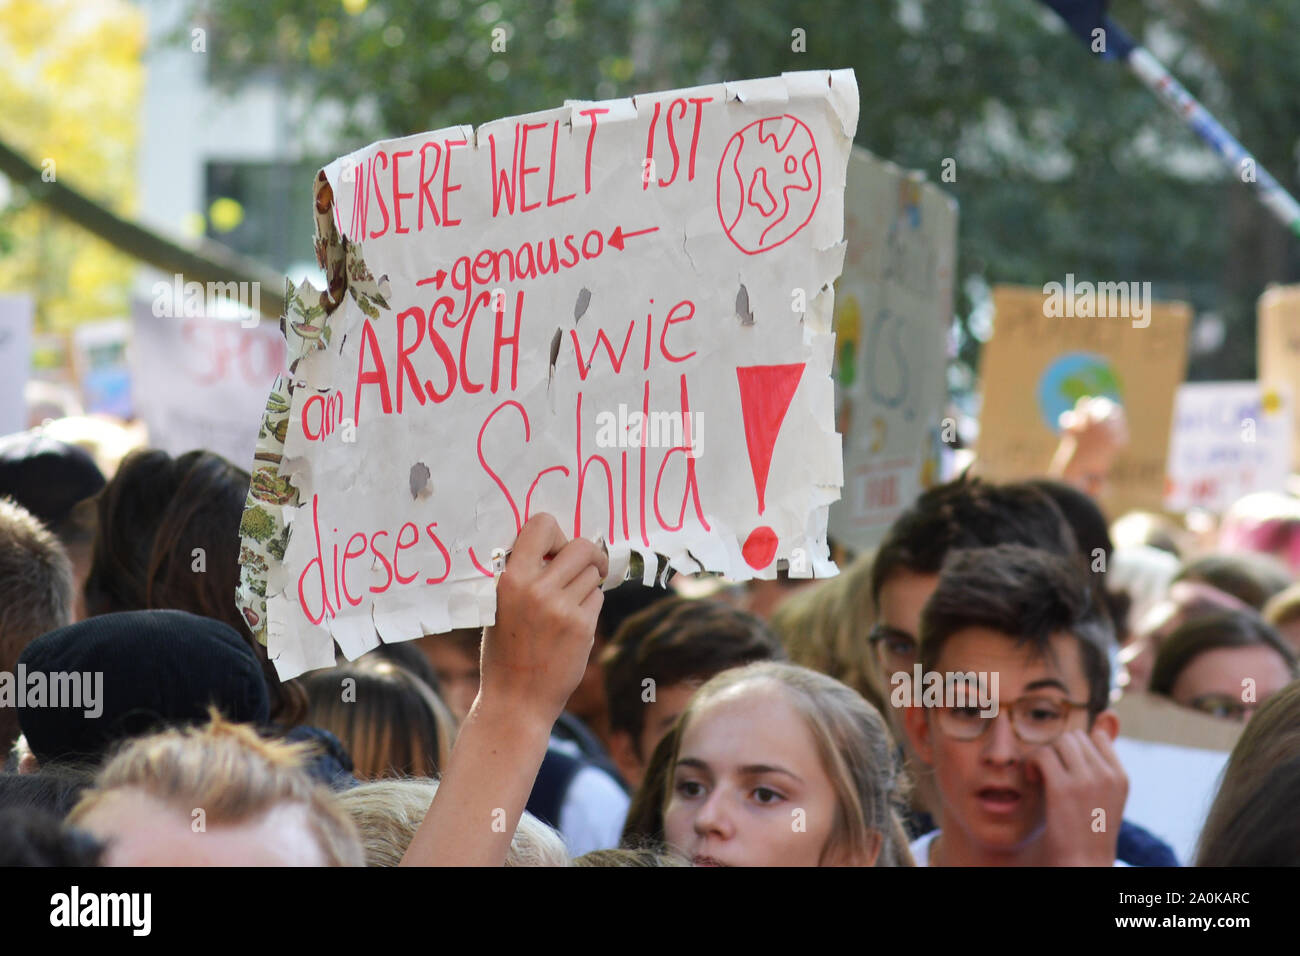 Demonstration during Global Climate Strike with damaged paper sign being held up saying 'Our world is as screwed as this sign' in German Stock Photo